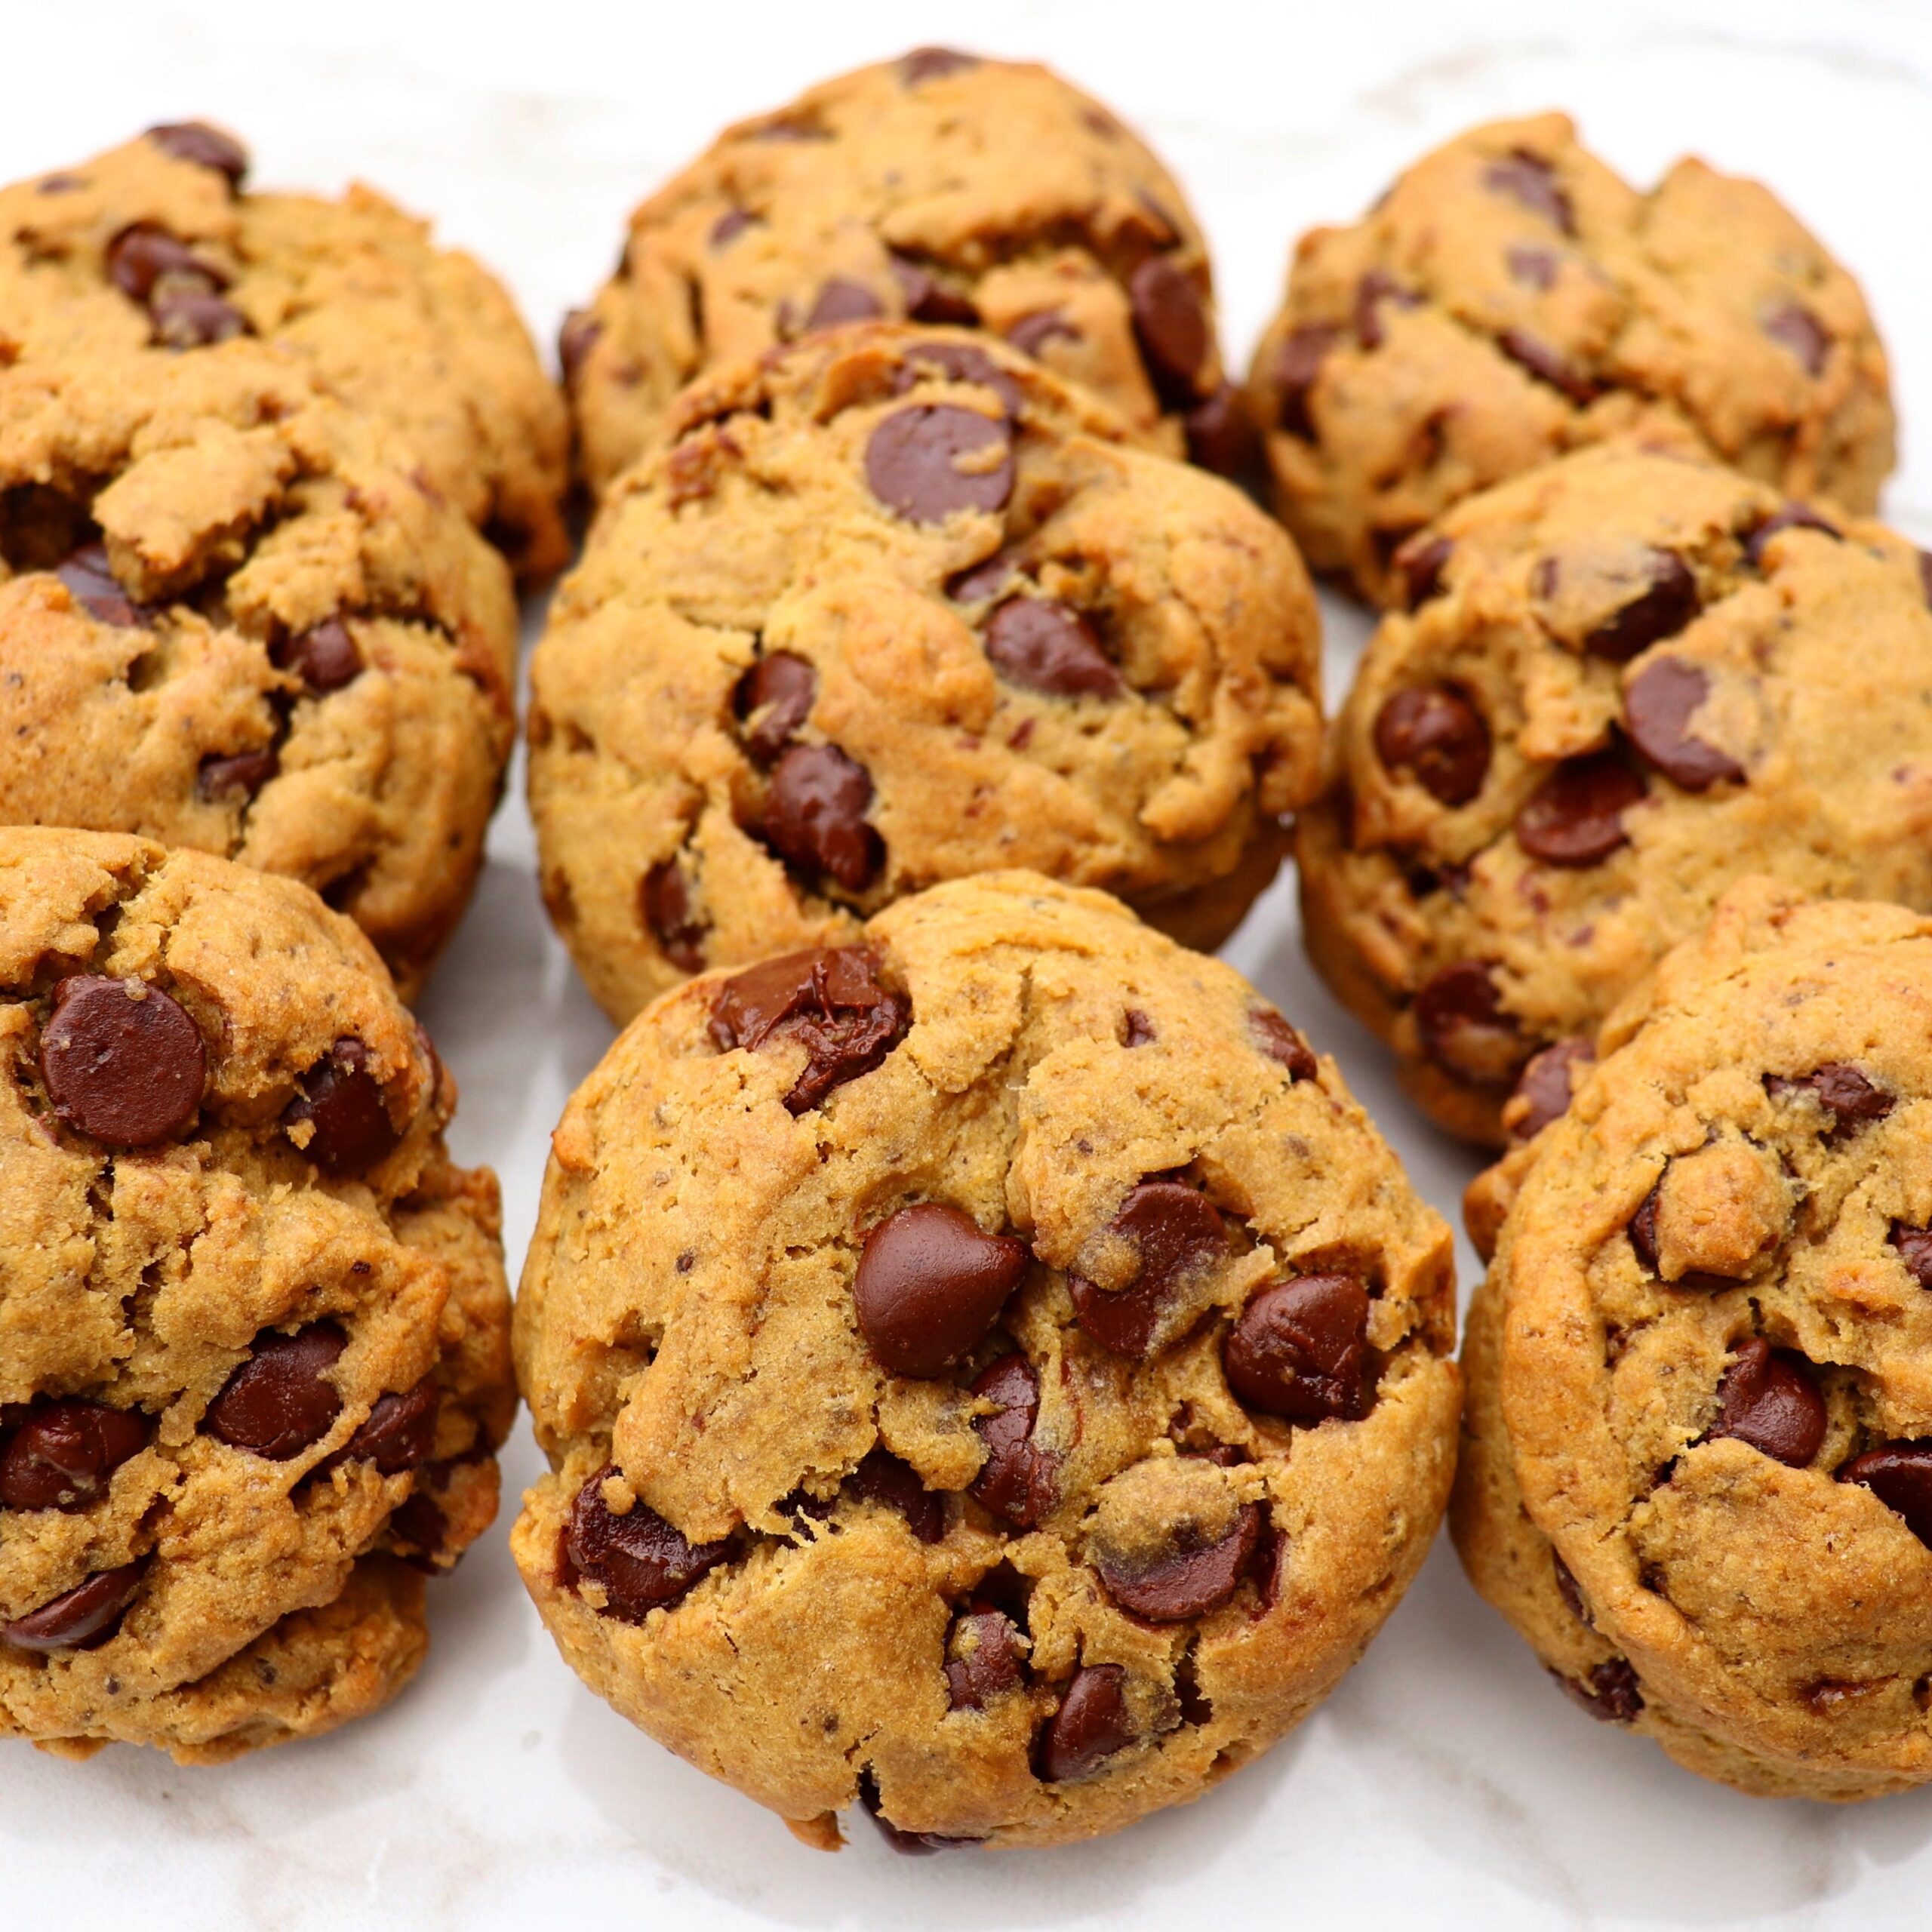  Don't let gluten allergies stop you from enjoying the simple pleasures in life - like delicious cookies!